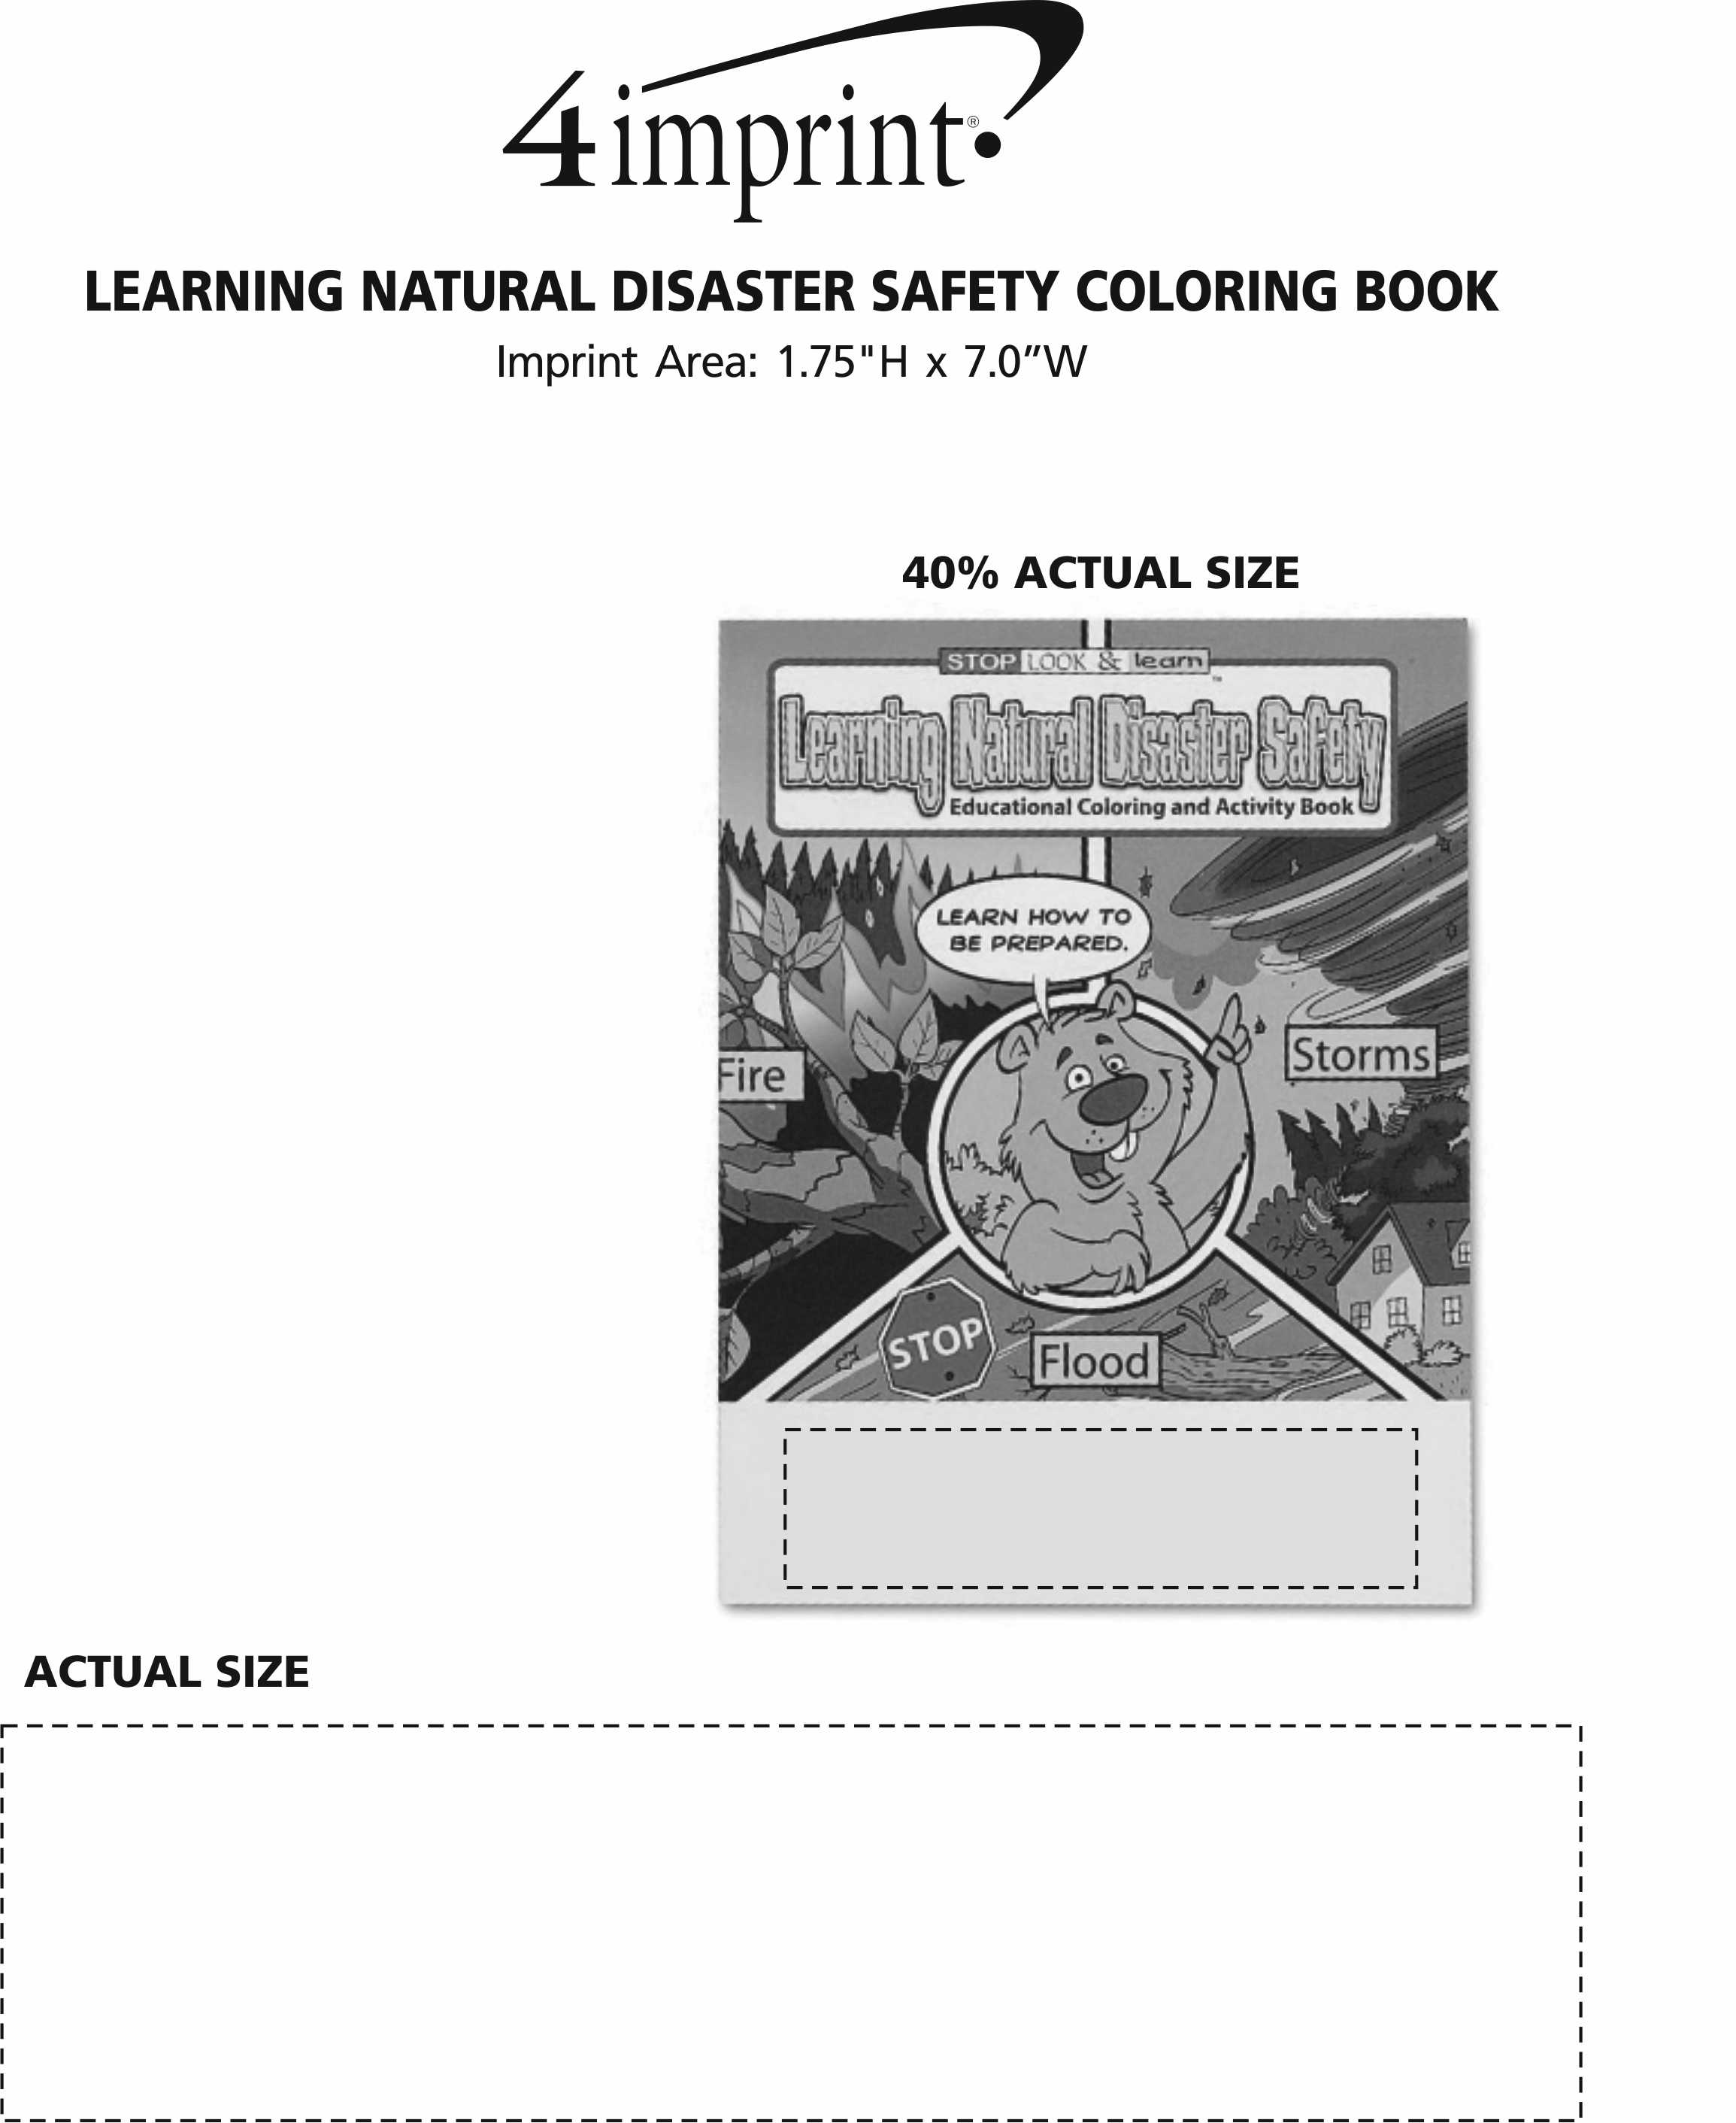 Imprint Area of Learning Natural Disaster Safety Coloring Book